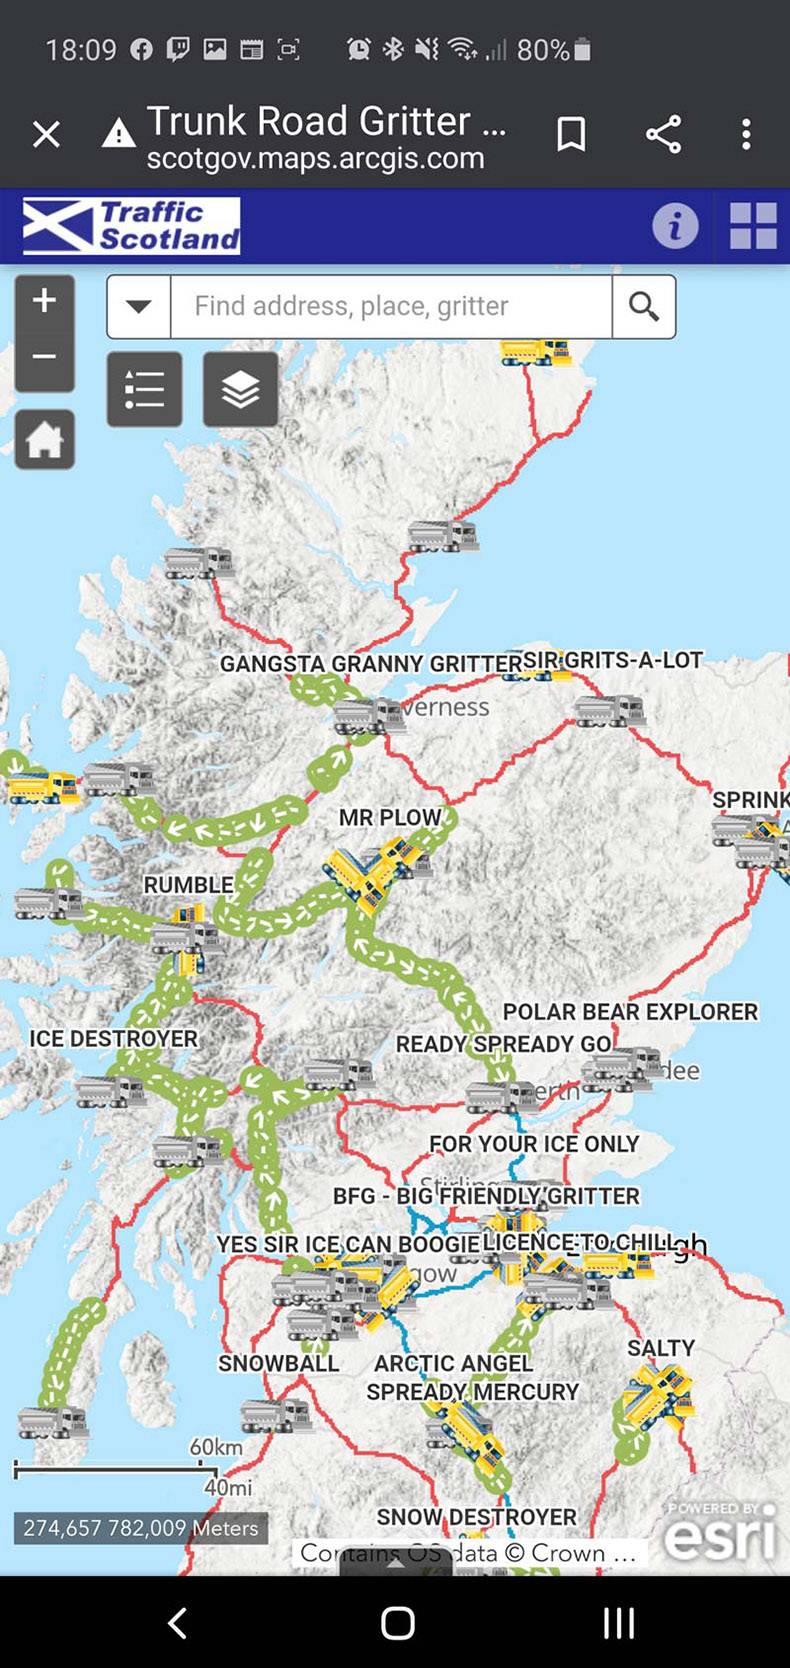 map - Perill 80% ... Trunk Road Gritter .. scotgov.maps.arcgis.com Traffic Scotland i Find address, place, gritter Gangsta Granny Grittersir GritsALot Verness Sprink Mr Plow Rumble Ro Ice Destroyer Polar Bear Explorer Ready Spready Gol Wee een of For Your